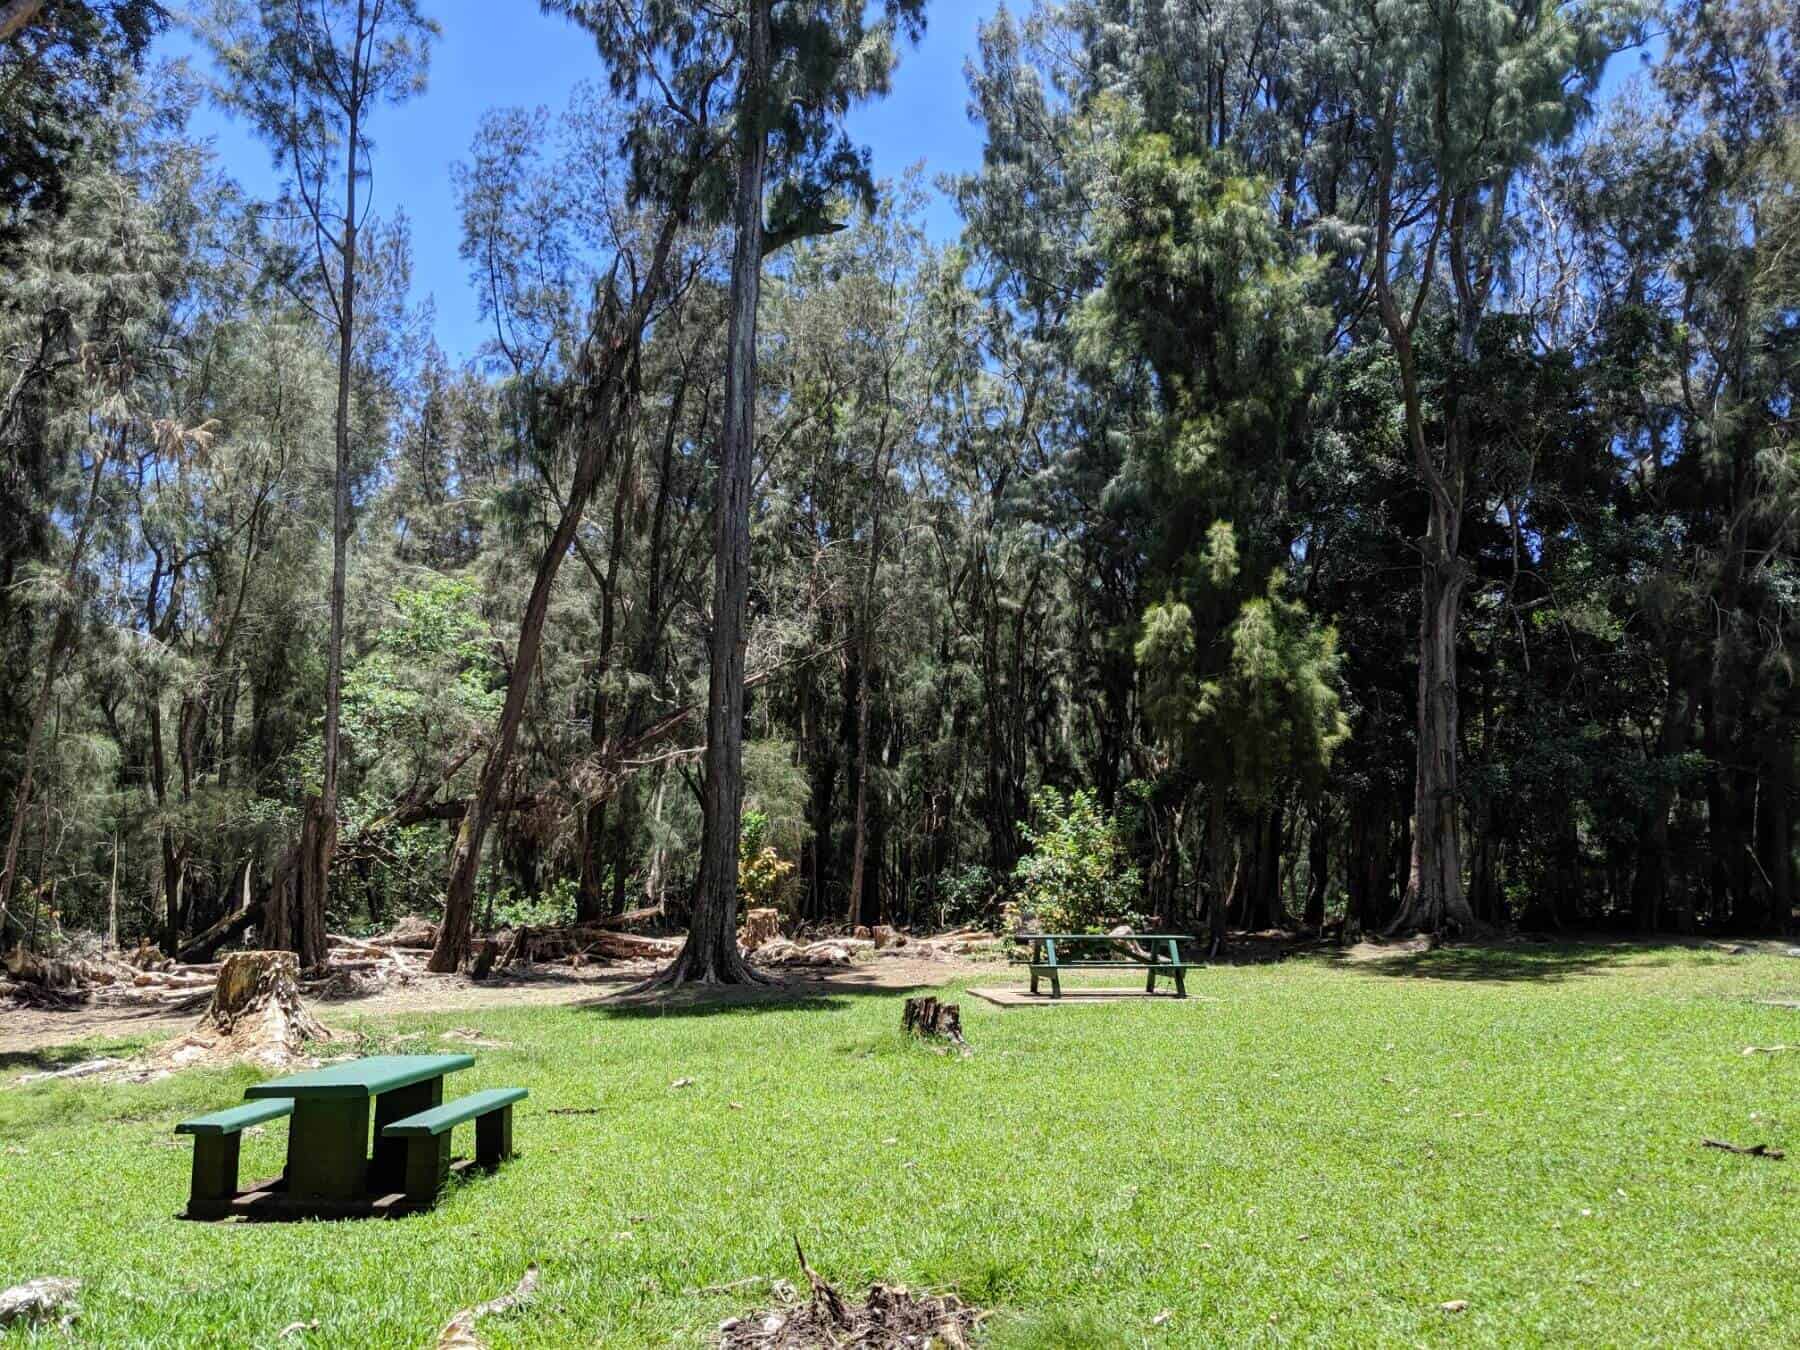 Pala'au State Park picnic tables in grass field with trees